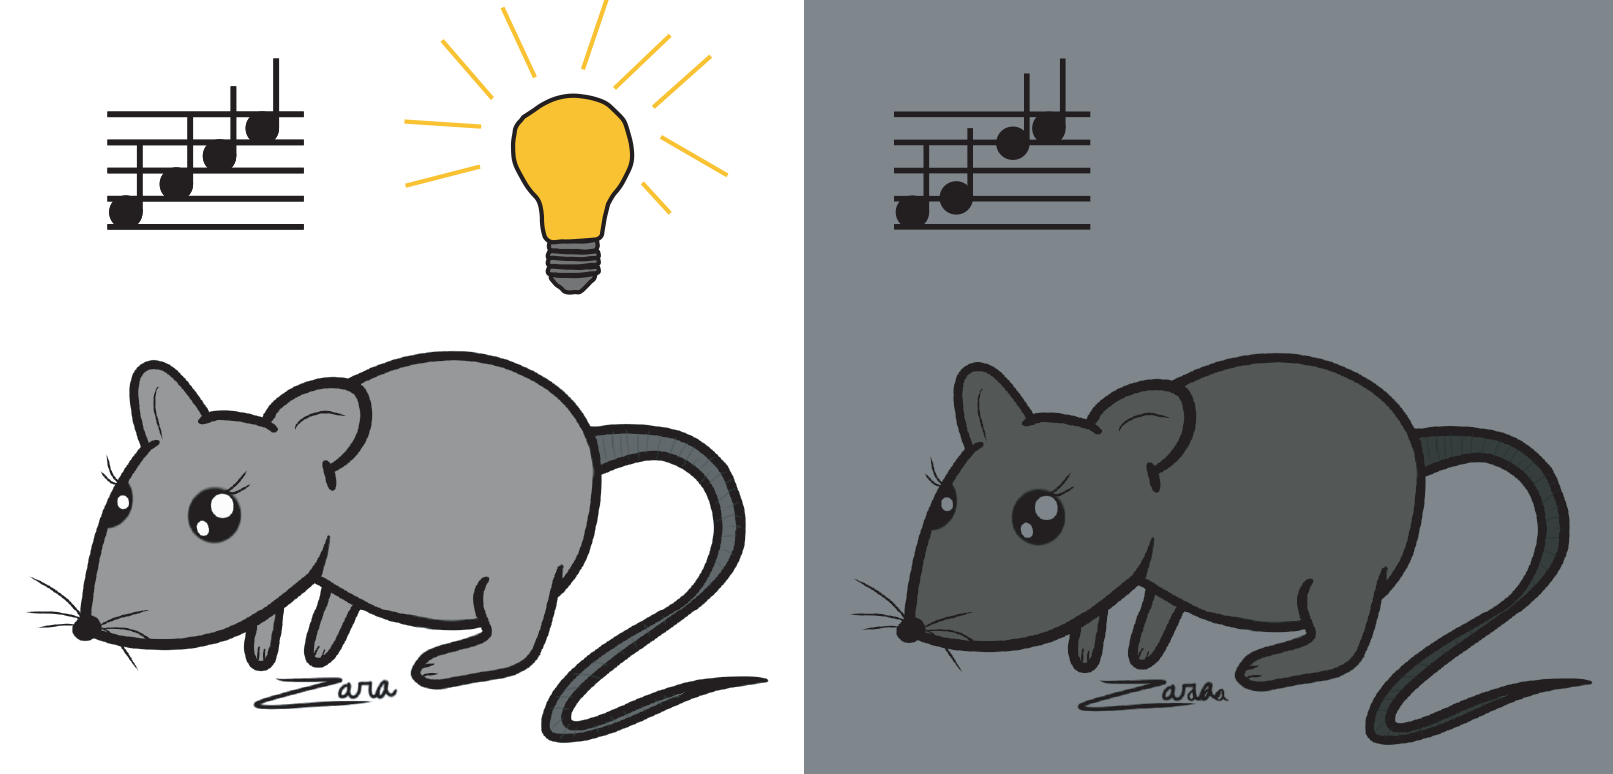 Using mice as a model, researchers at UMD found that a week in the dark changes auditory cortex circuits in adult brains, altering sensitivity to different frequencies long after the optimal age for sensory learning. Image Credit: Zara Kanold-Tso